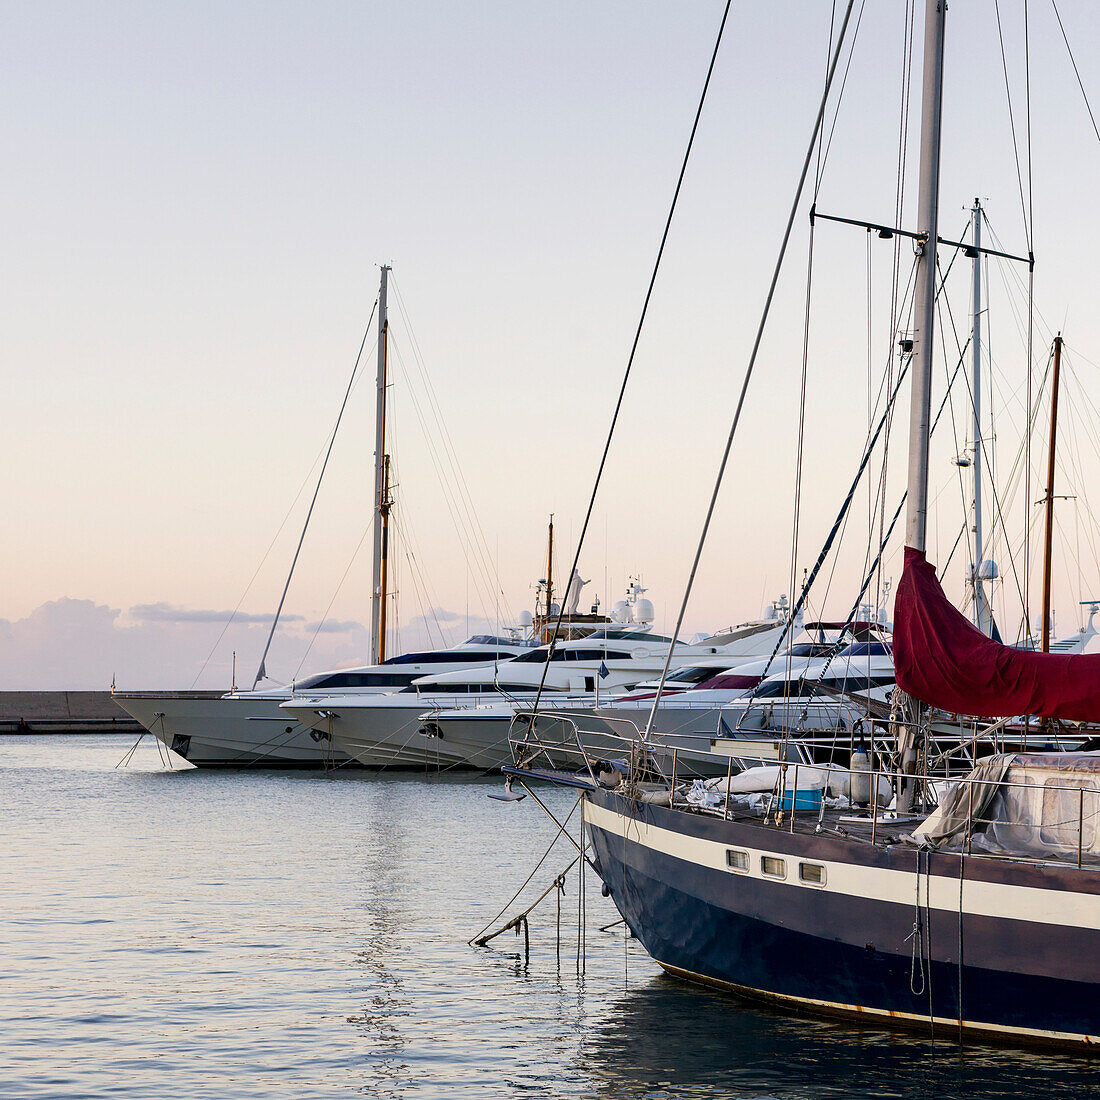 'A row of yachts moored in a harbour; Ischia, Italy'